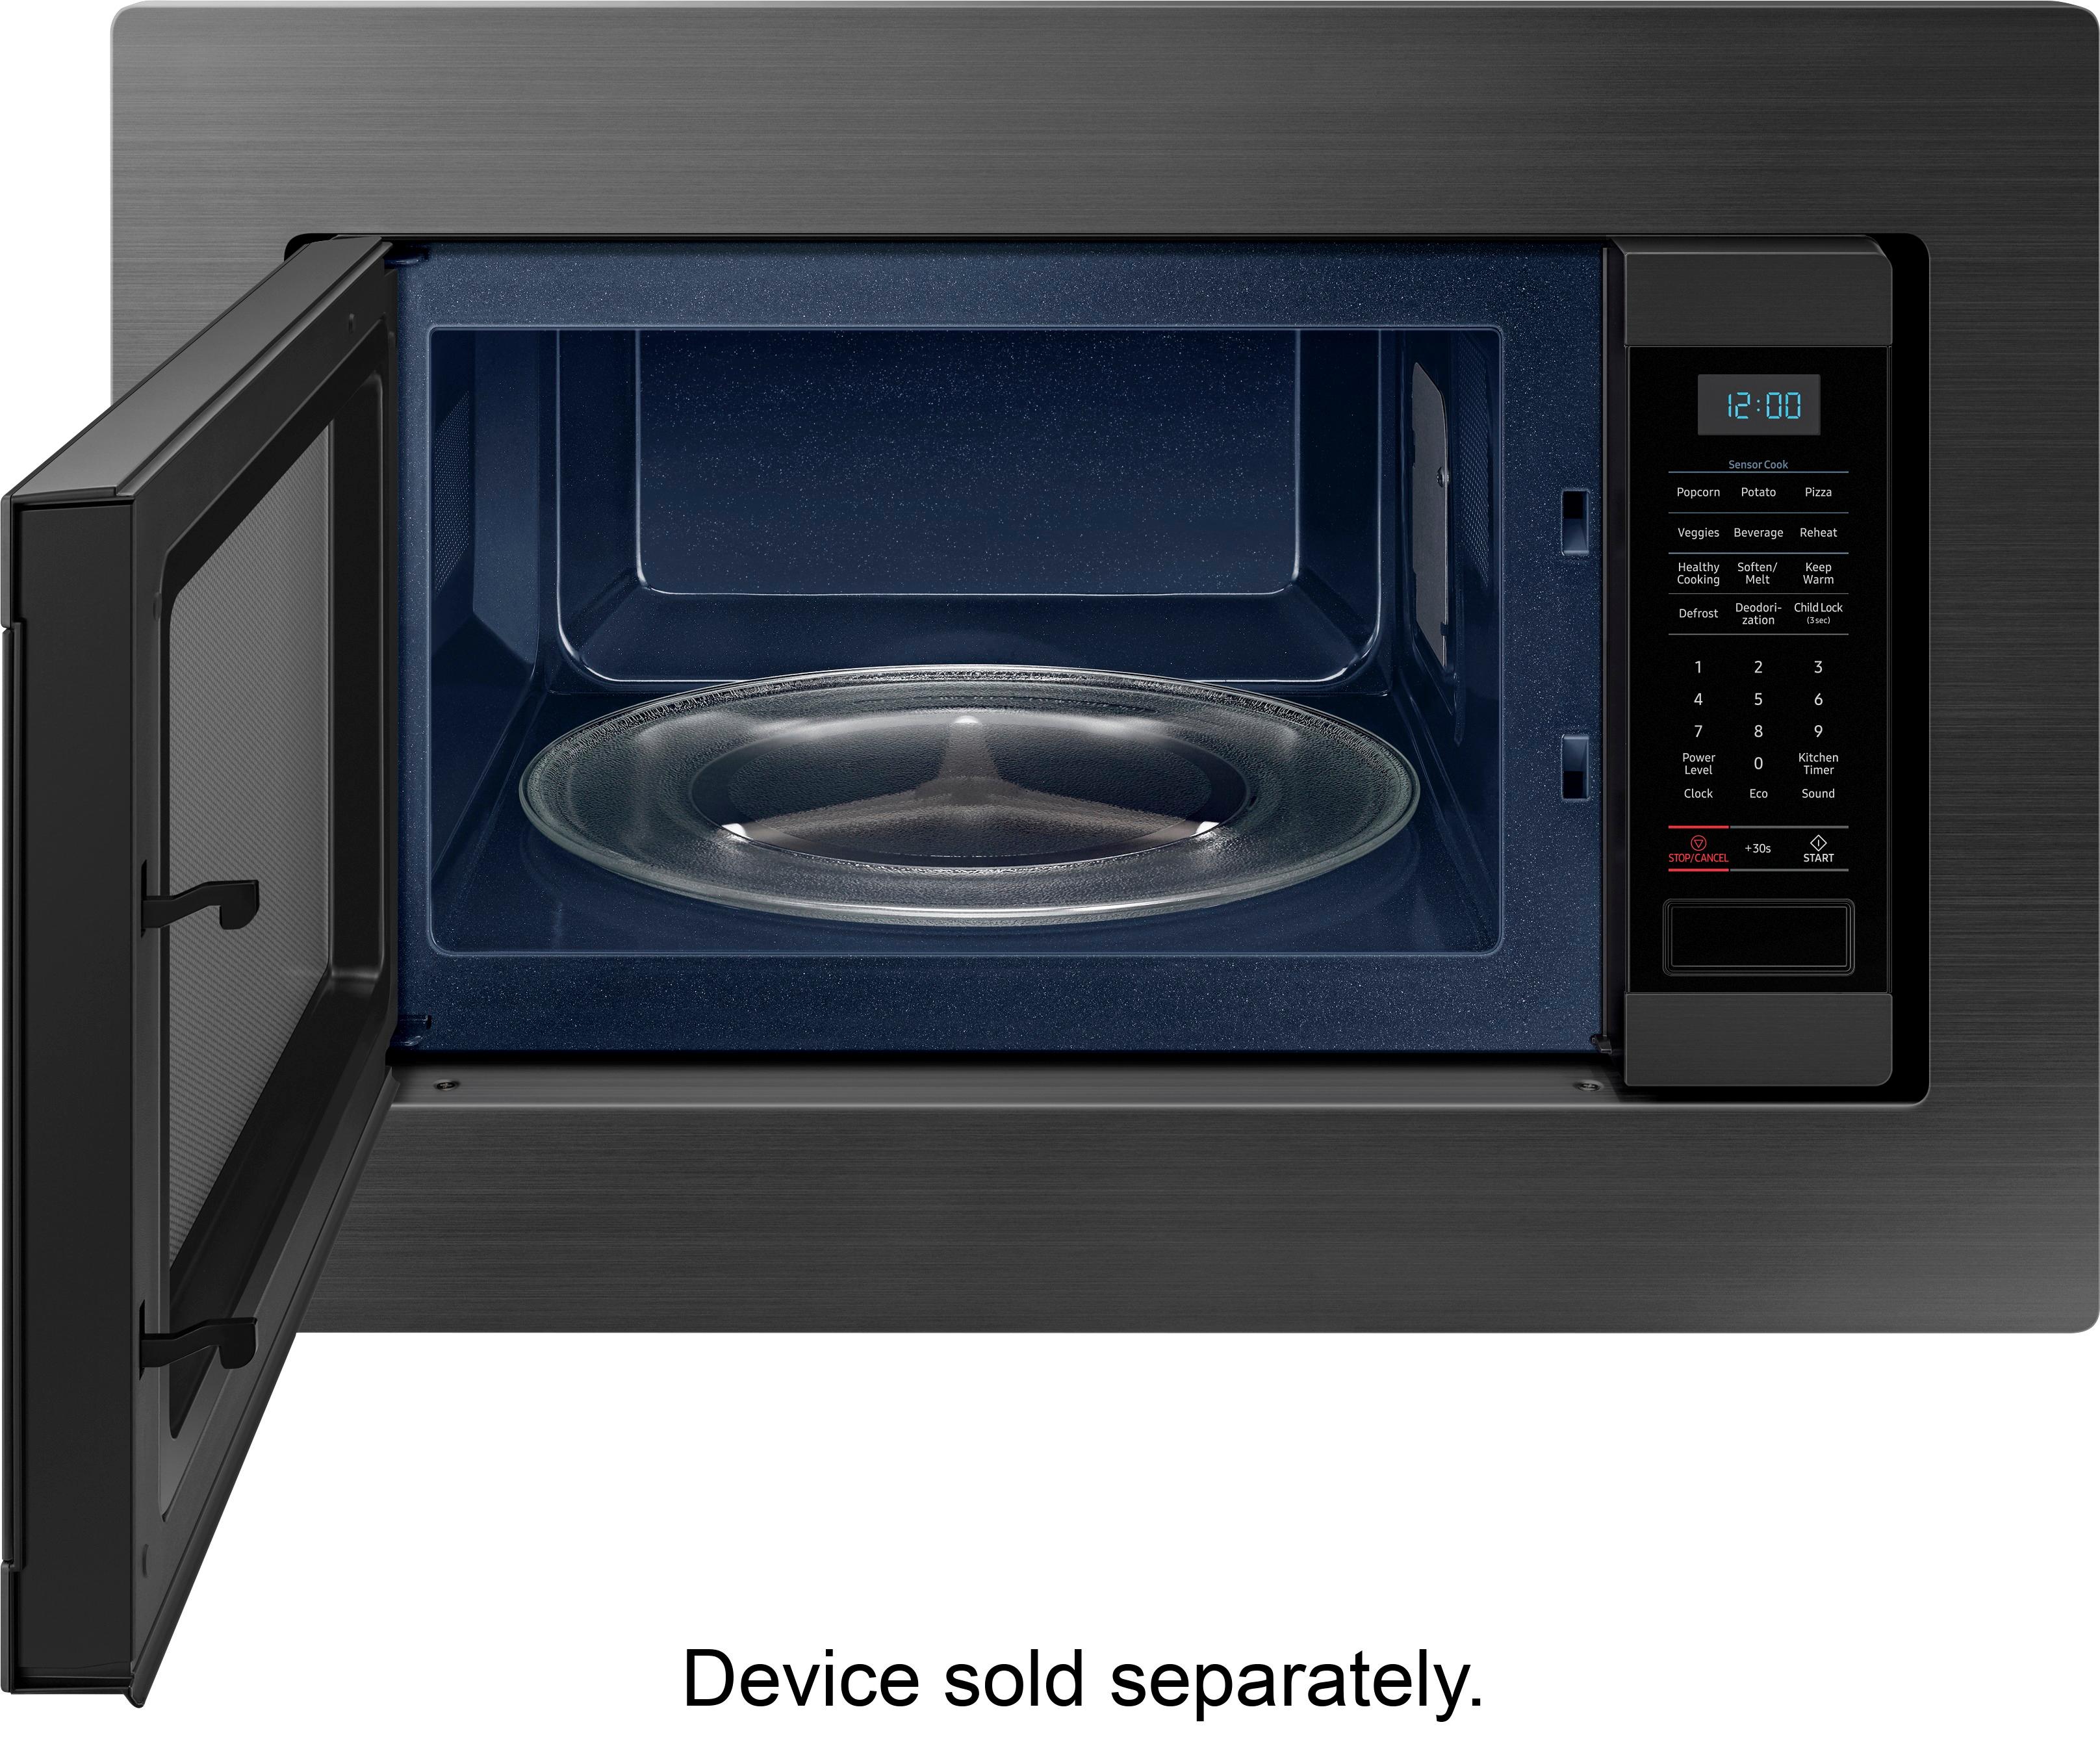 Samsung 1.9 Cu. Ft. Countertop Microwave for Built-In Applications with  Sensor Cook Black Stainless Steel MS19M8020TG - Best Buy